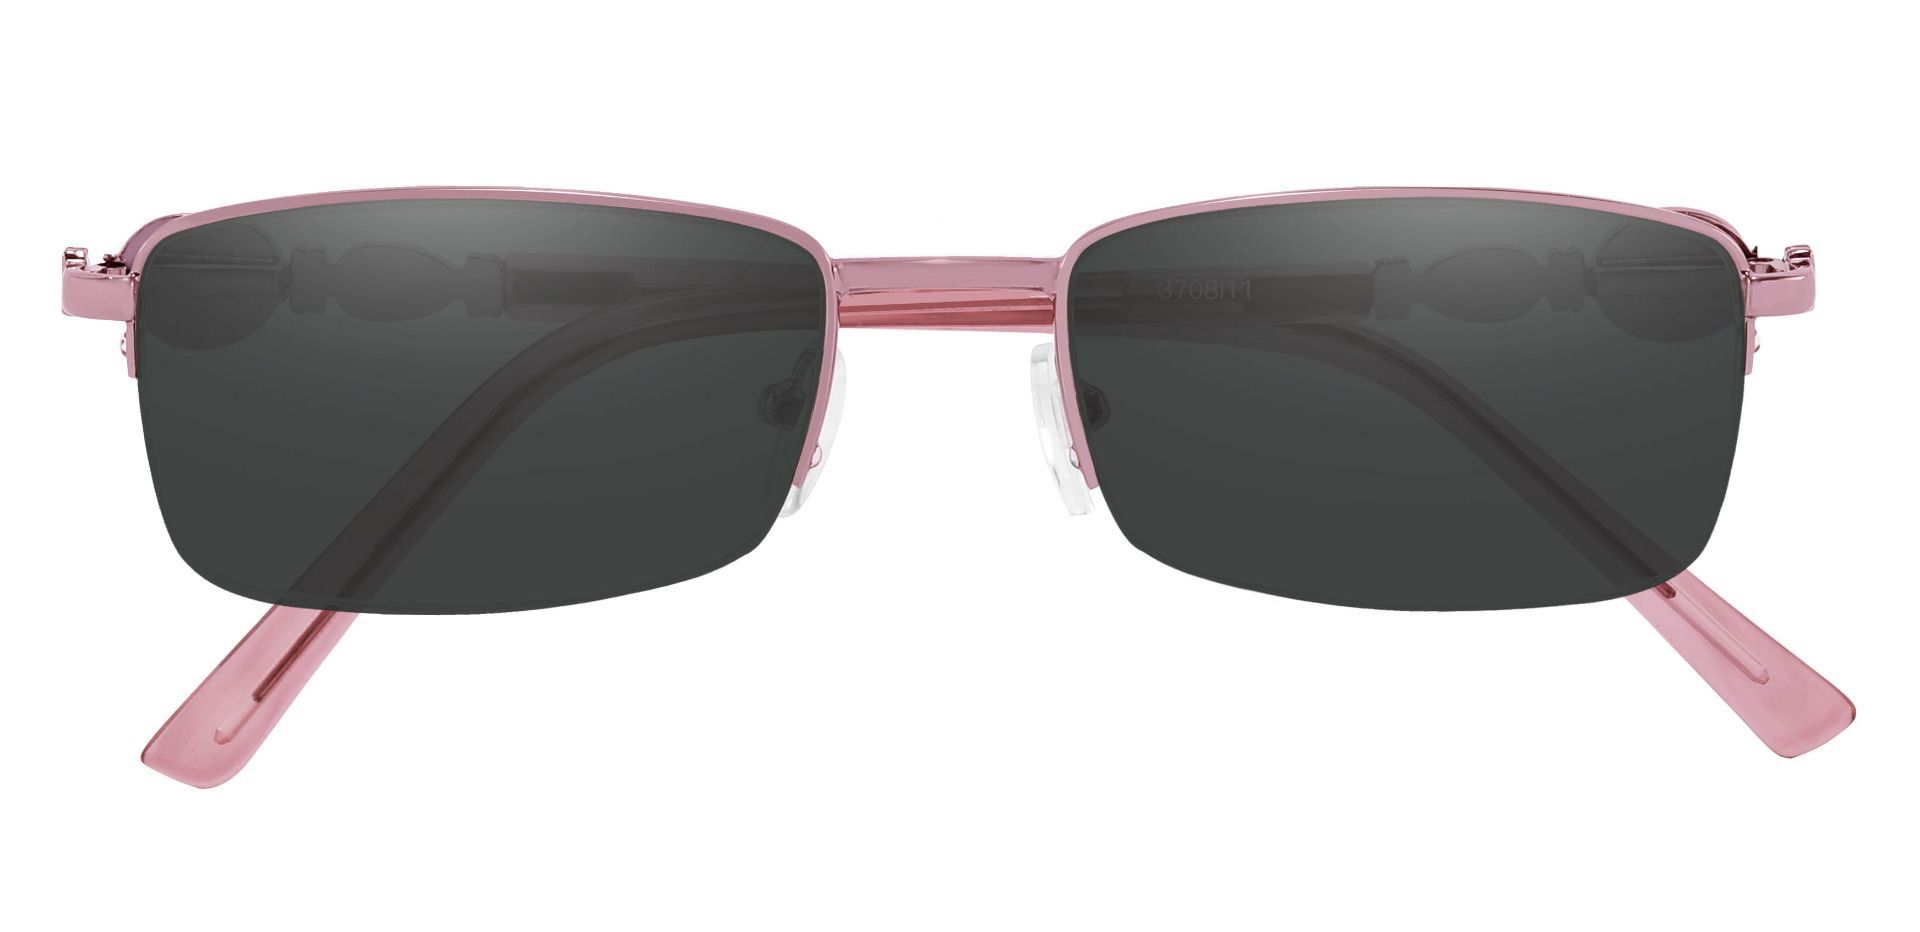 Crowley Rectangle Reading Sunglasses - Pink Frame With Gray Lenses